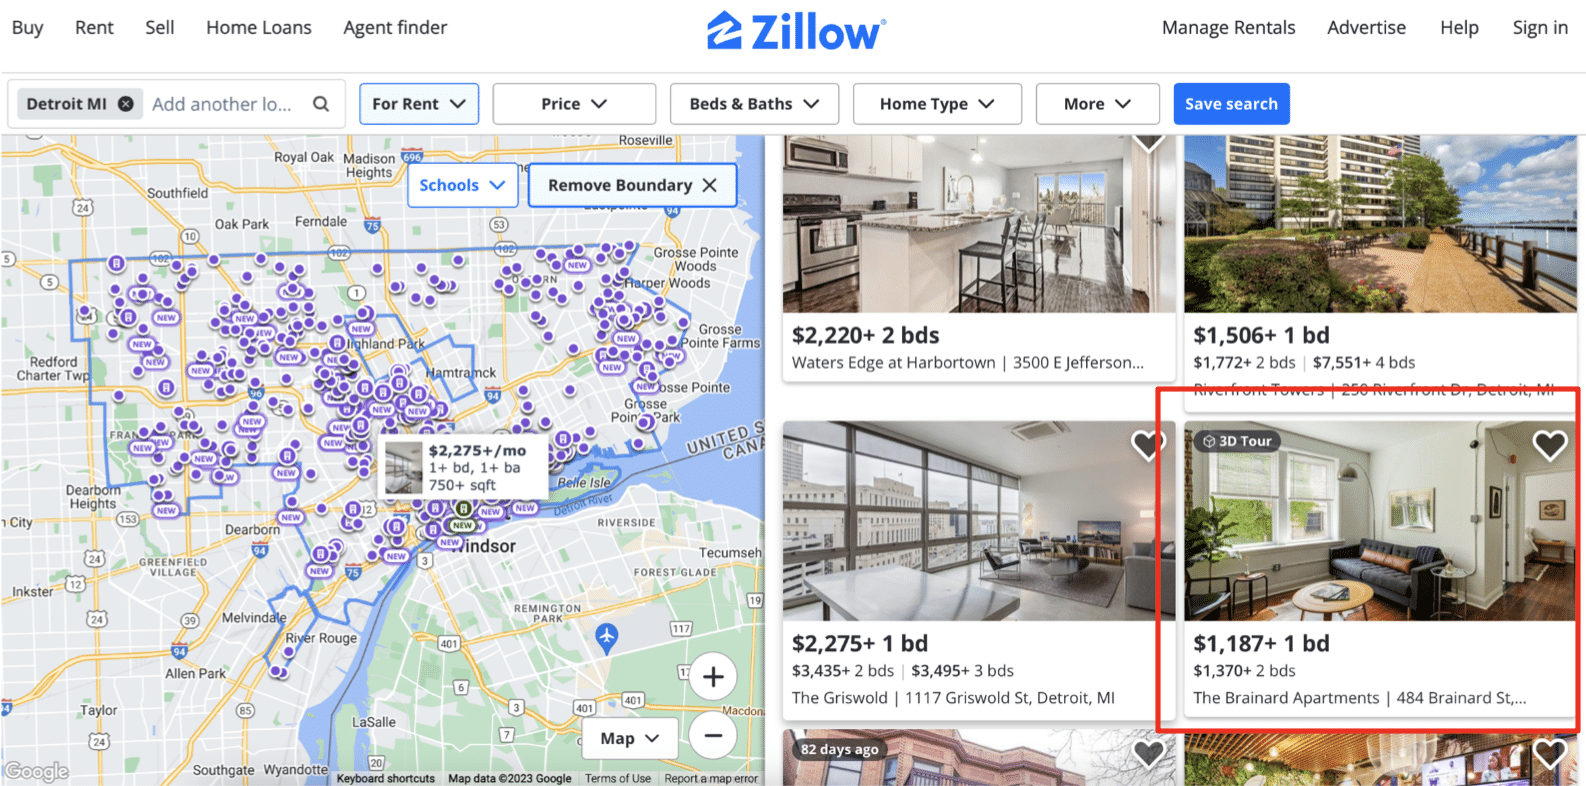 Search Results of Detroit Rentals in Zillow.